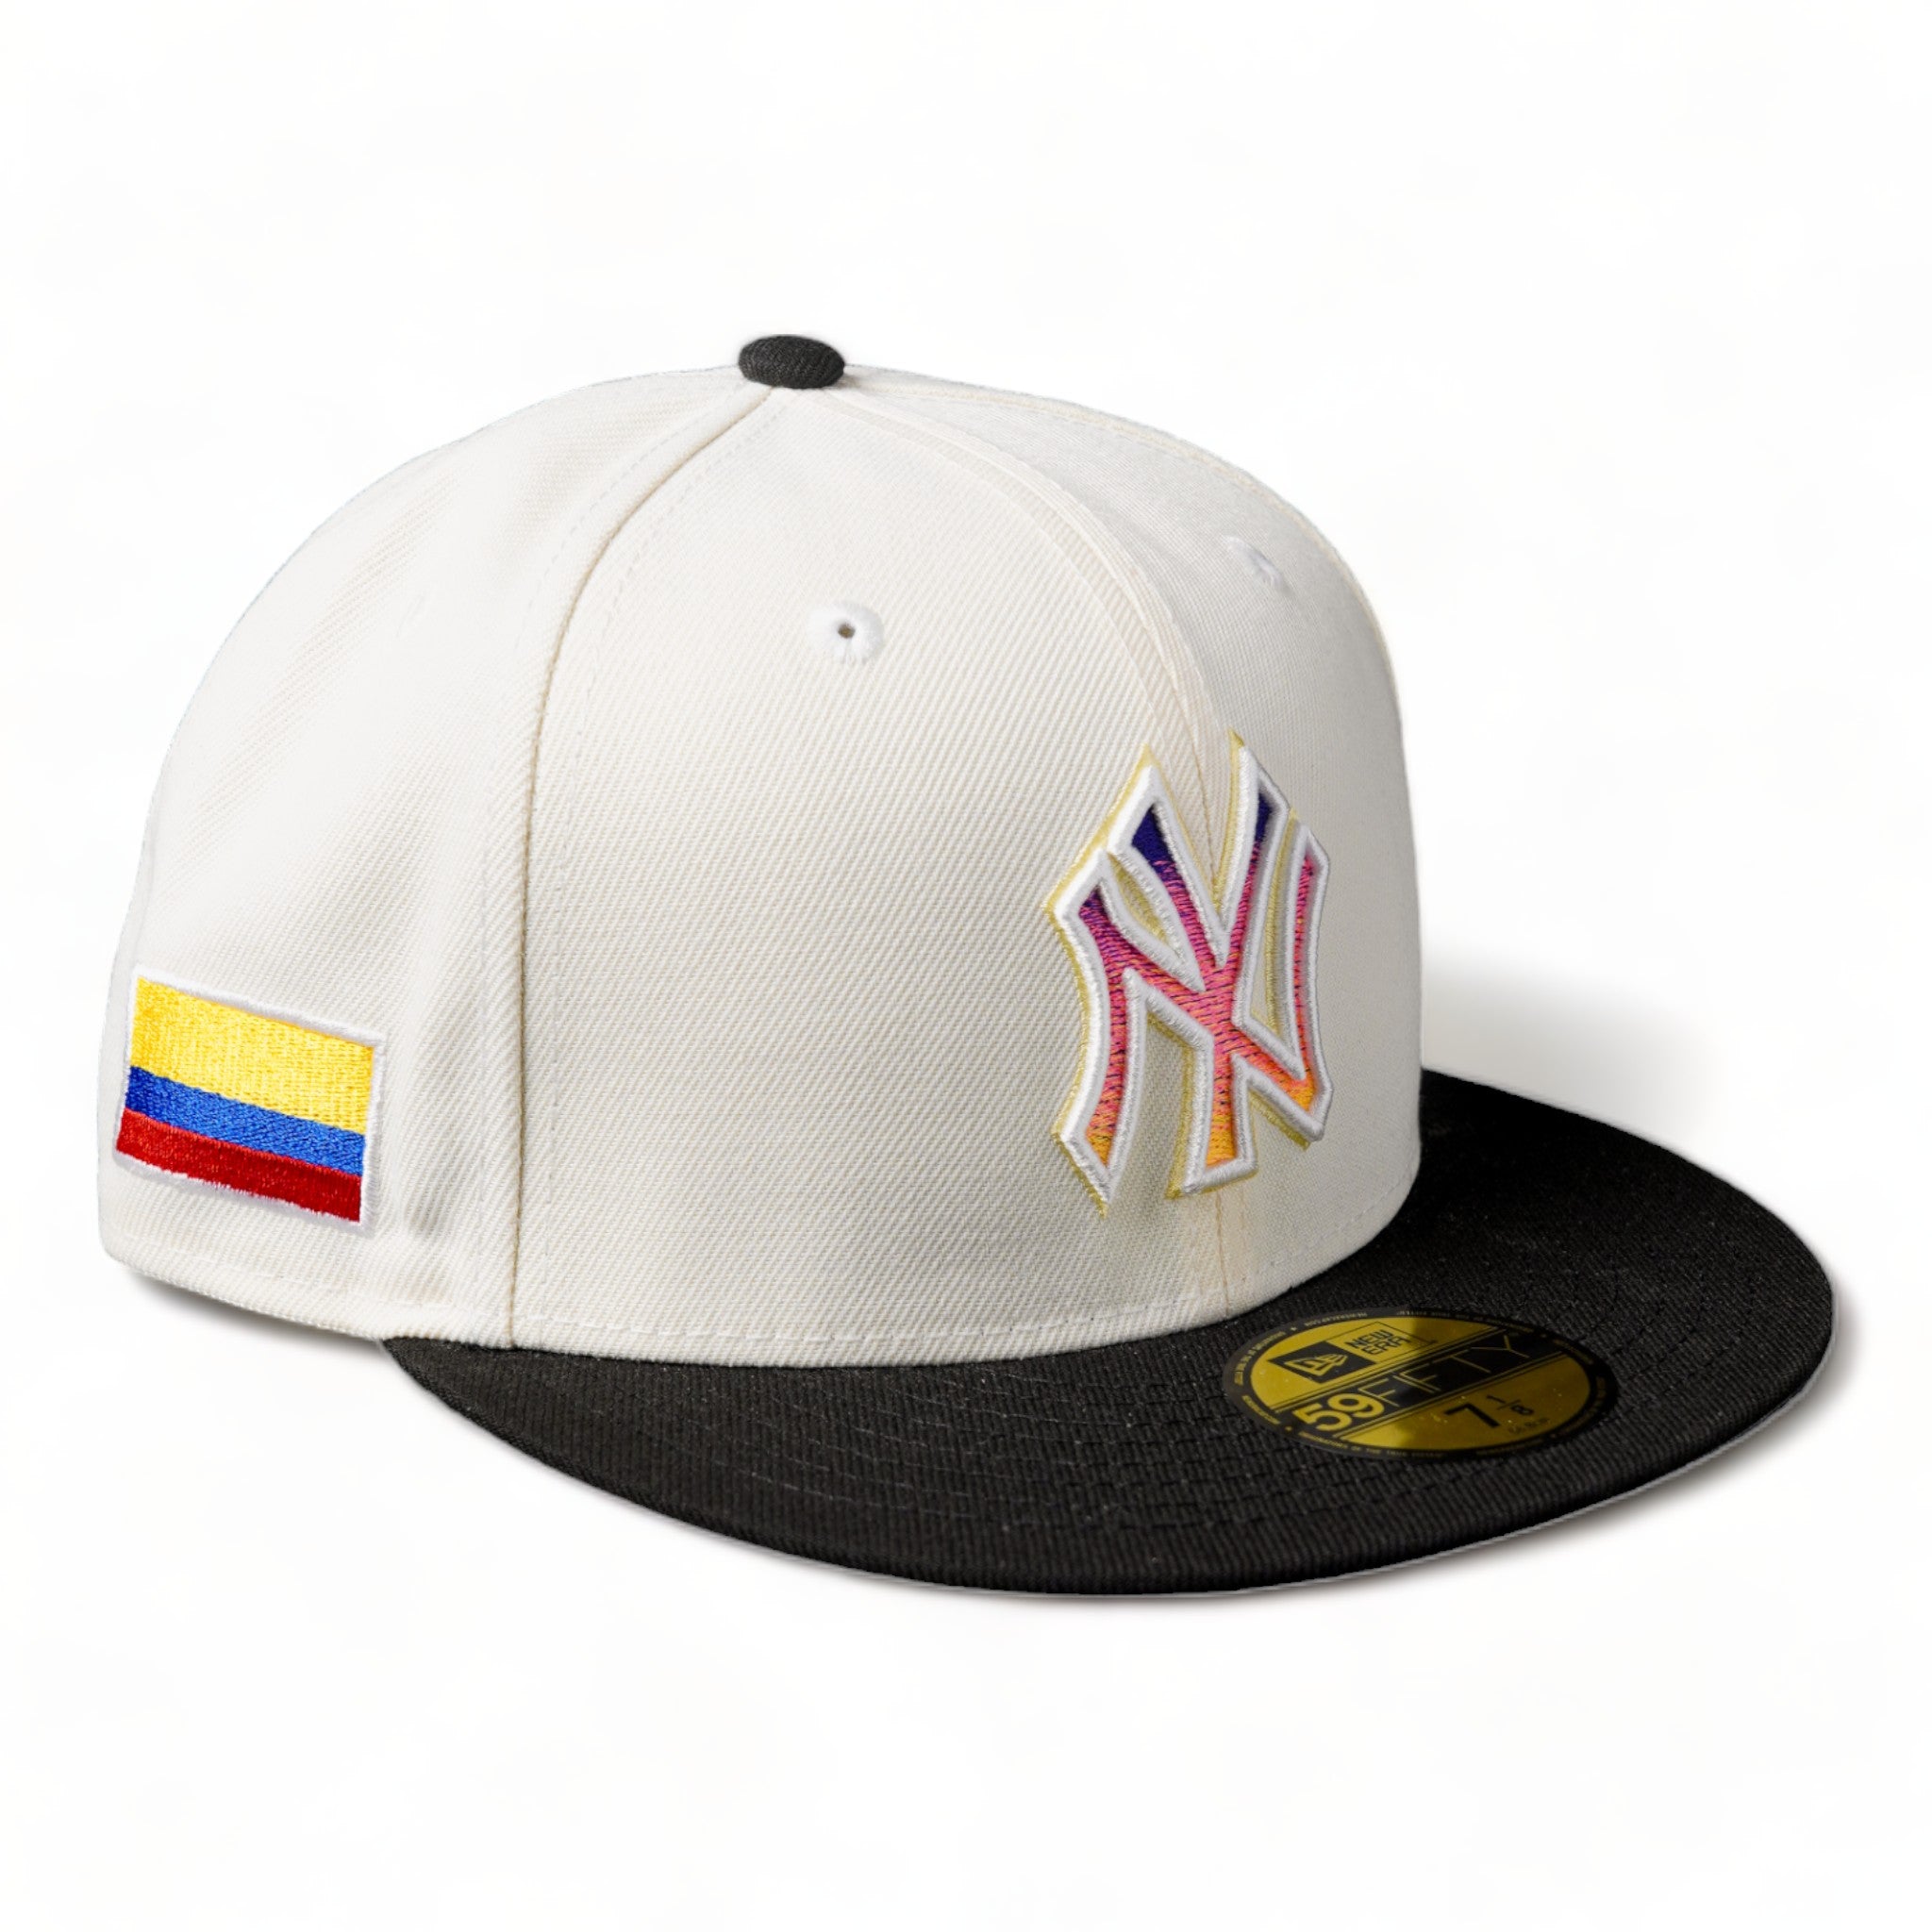 New Era 59Fifty Fitted New York Yankees Medellin Sunset Pack (Colombia Flag) (White)